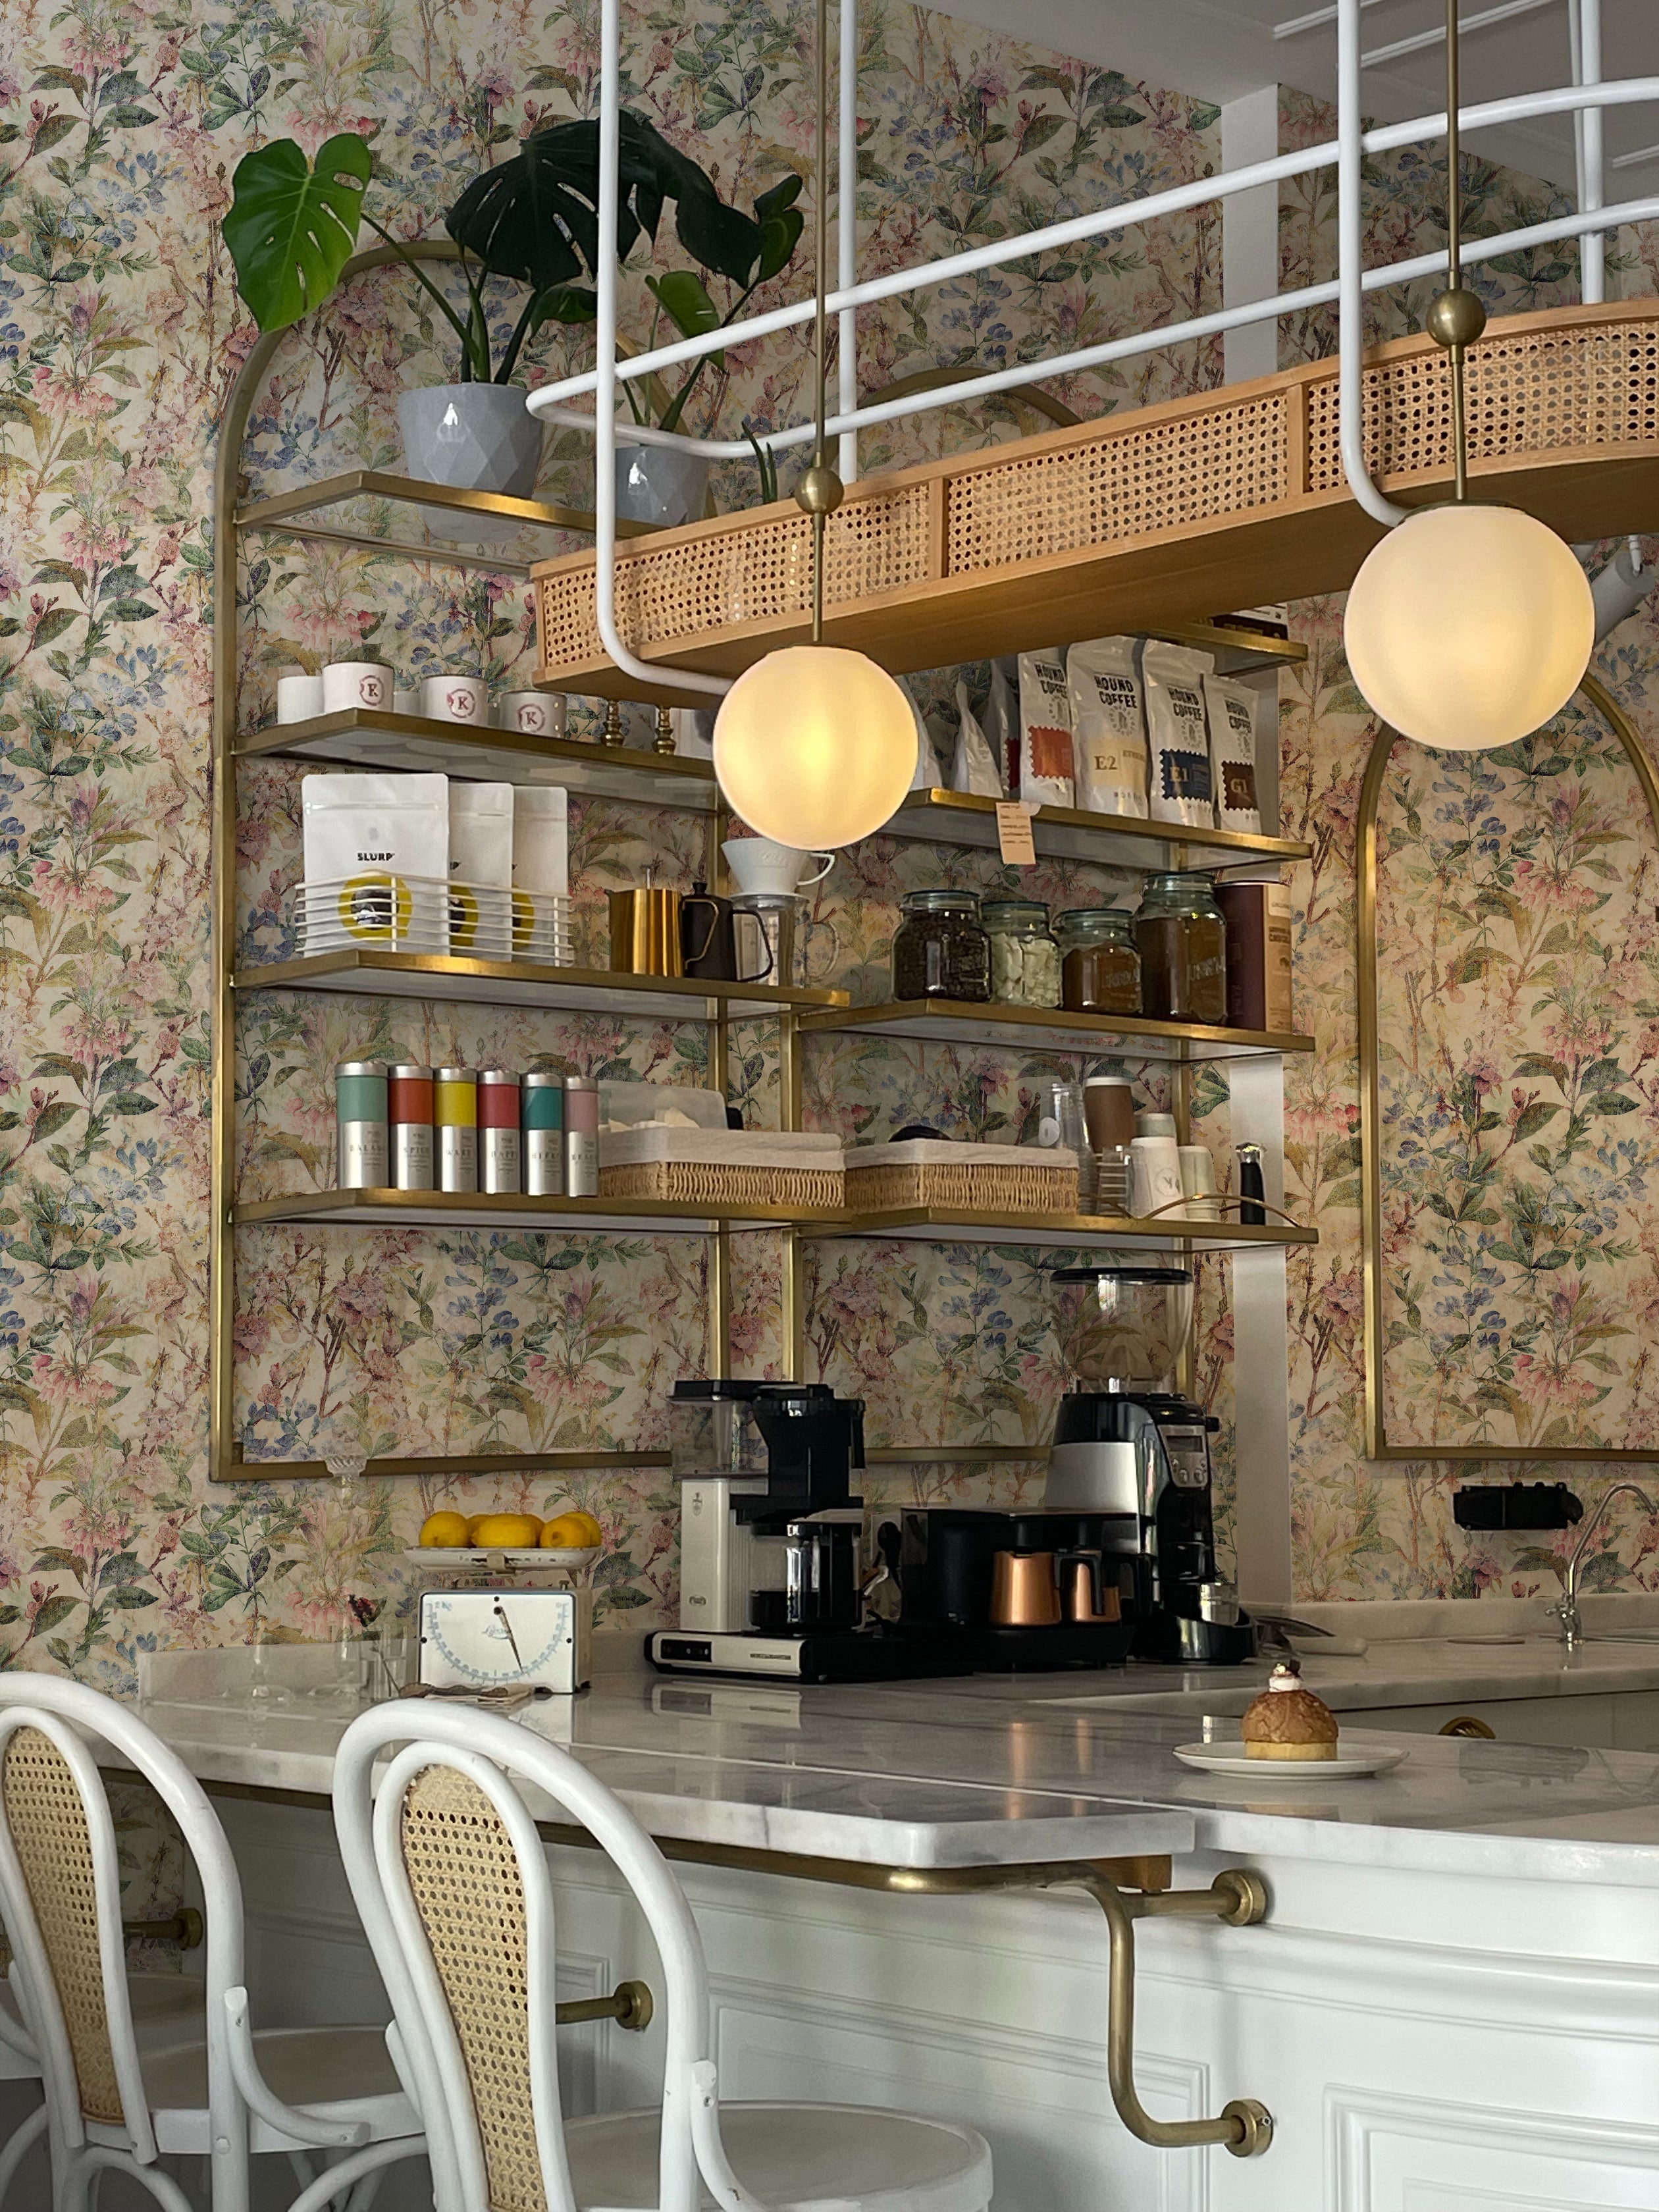 A sophisticated kitchen space with a ceiling-mounted storage shelf adorned with the "Ancient Florals Wallpaper." The wallpaper features a detailed print of varied flowers and plants in pastel colors, enhancing the romantic vintage aesthetic of the room.